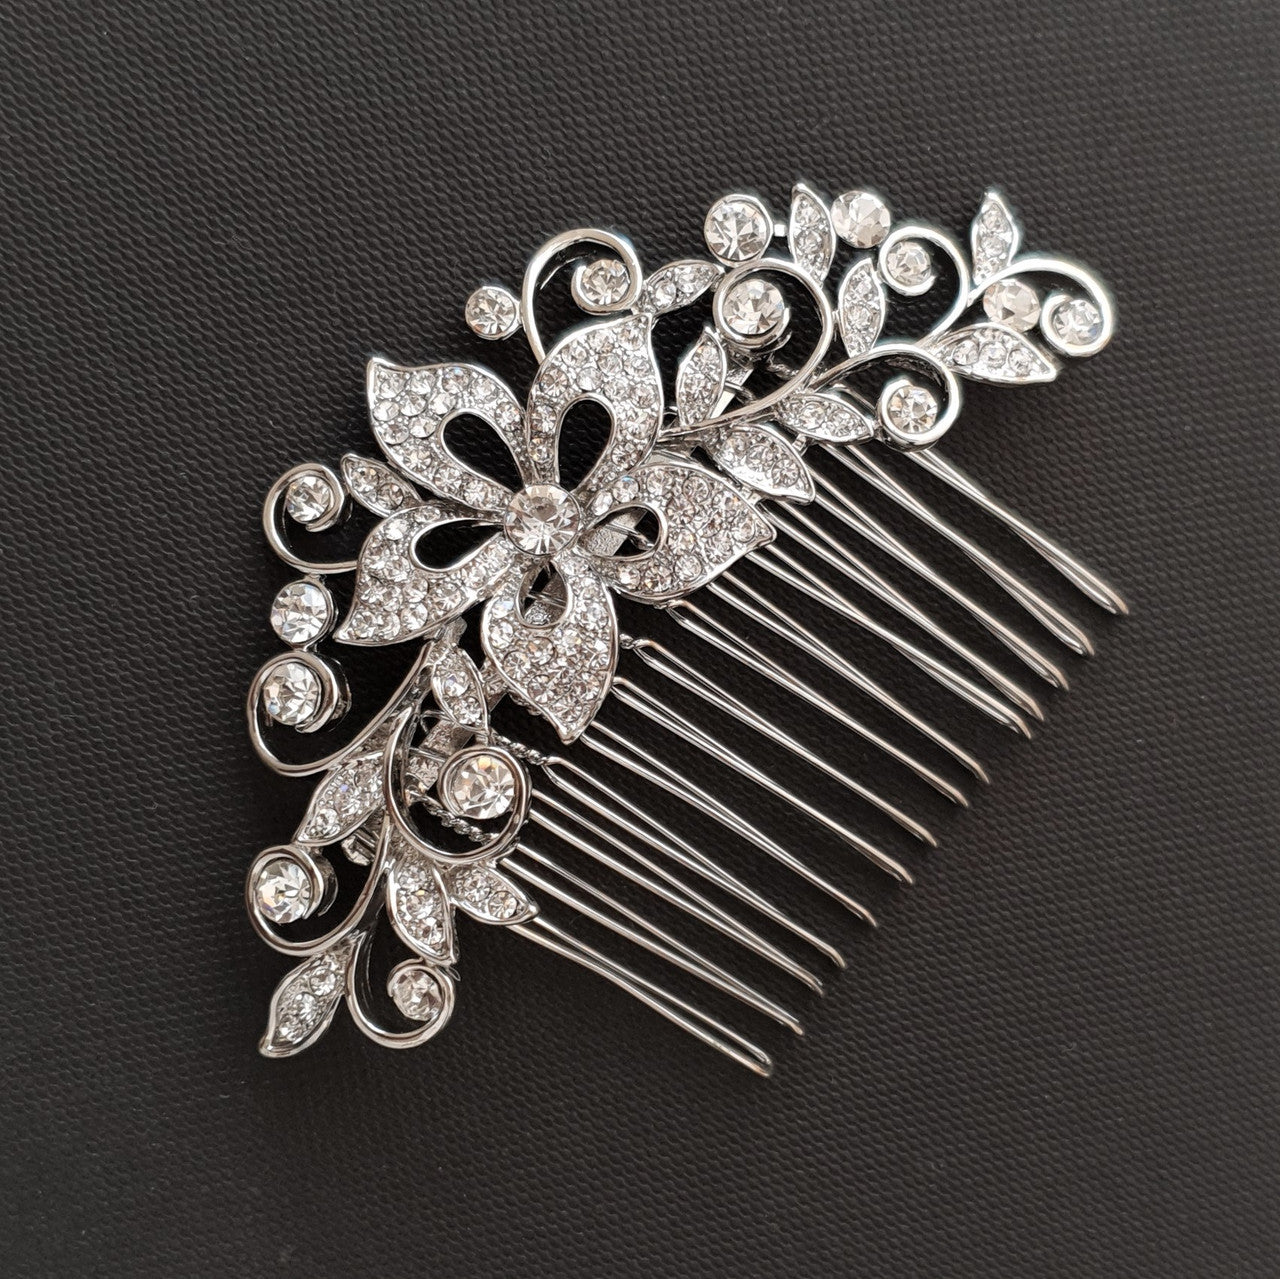 Crystal Flower Vintage Bridal Hair Comb-Fiore